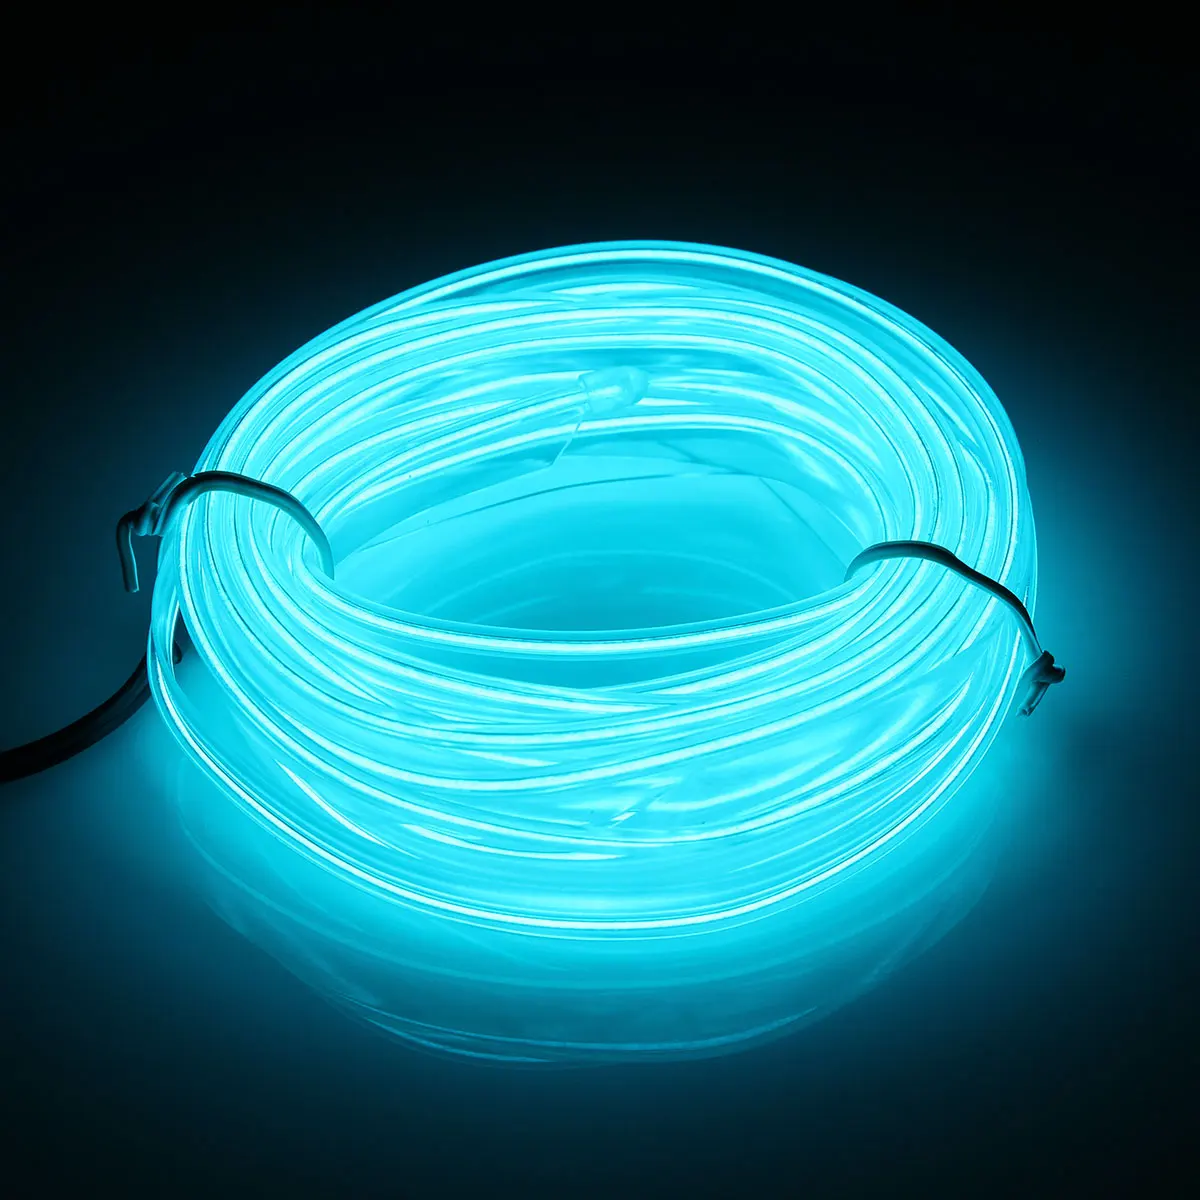 LED EL Wire Neon Glow String Strip Light Rope Controller Car Decor Dance Party